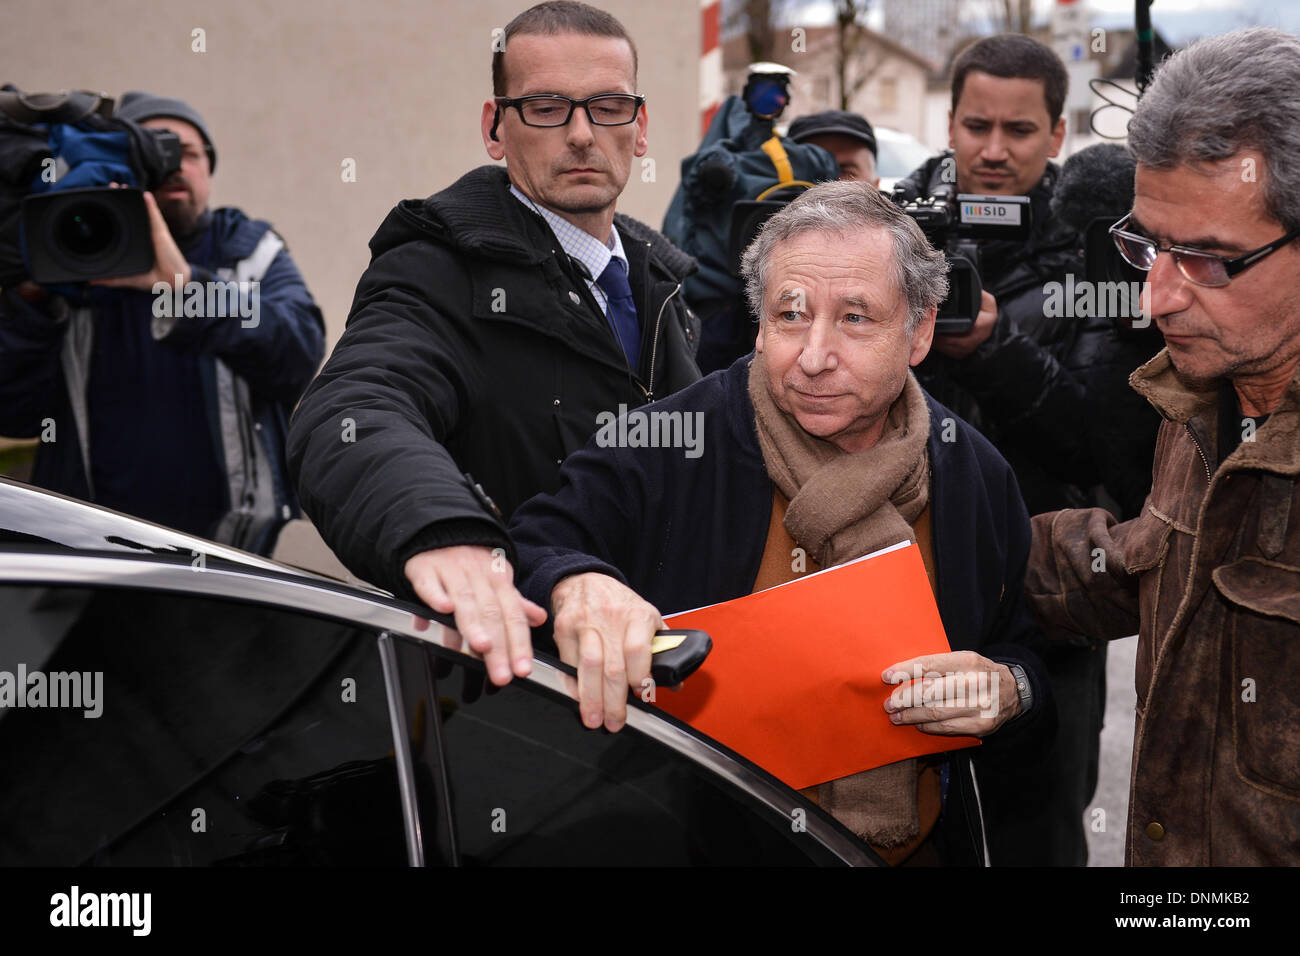 Grenoble, France. 02nd Jan, 2014. President of the Federation Internationale de l'Automobile (F.I.A.) Jean Todt (C) returns to the 'Centre Hospitalier Universitaire' (CHU) hospital in Grenoble, near the French Alps, France, 02 January 2014. Retired Formula One German racing driver Michael Schumacher is still in a critical condition, after he underwent emergency surgery after being admitted in a coma with a cranial trauma following a ski accident in Meribel, according to the hospital in Grenoble. Photo: David Ebener/dpa/Alamy Live News Stock Photo